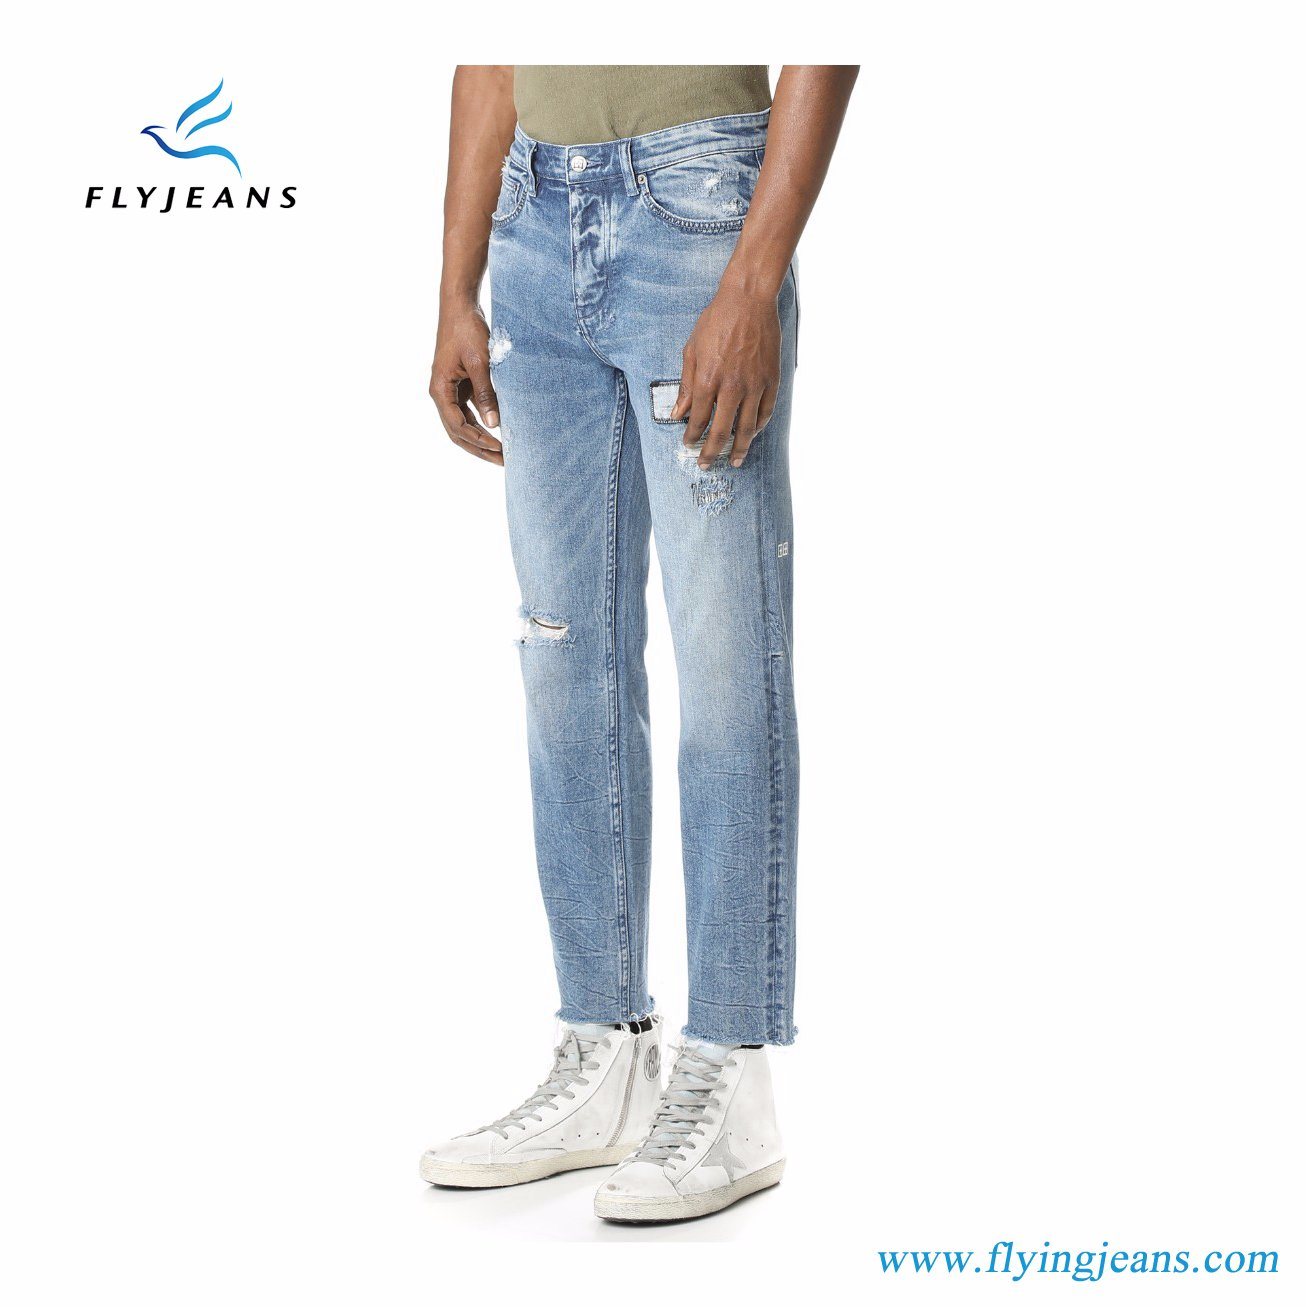 Distressed Blue Denim Jeans Have Shredded Holes for Men by Fly Jeans